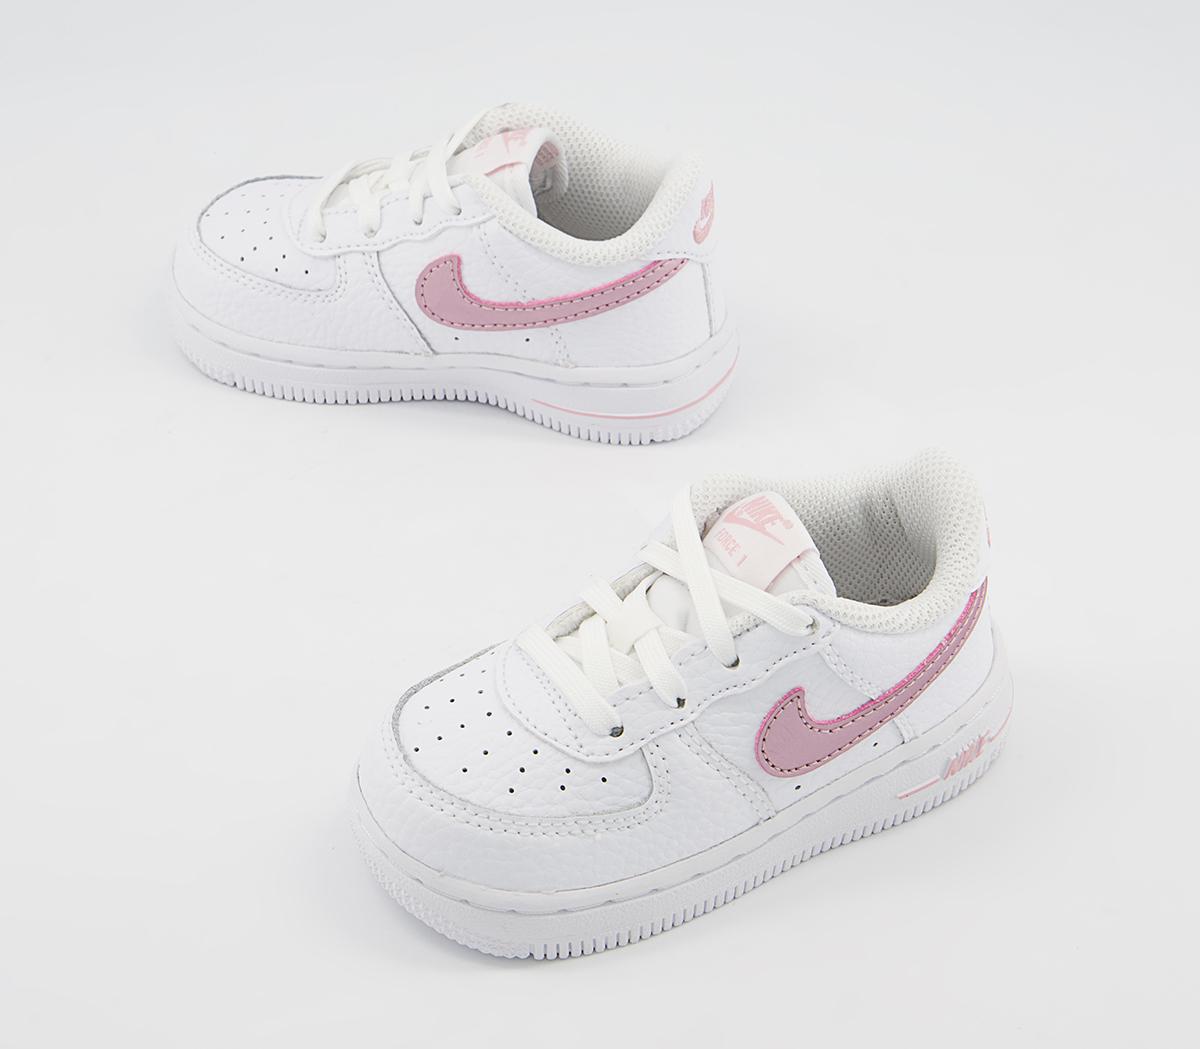 Nike Air Force 1 Infant Trainers White Pink Glaze - Unisex